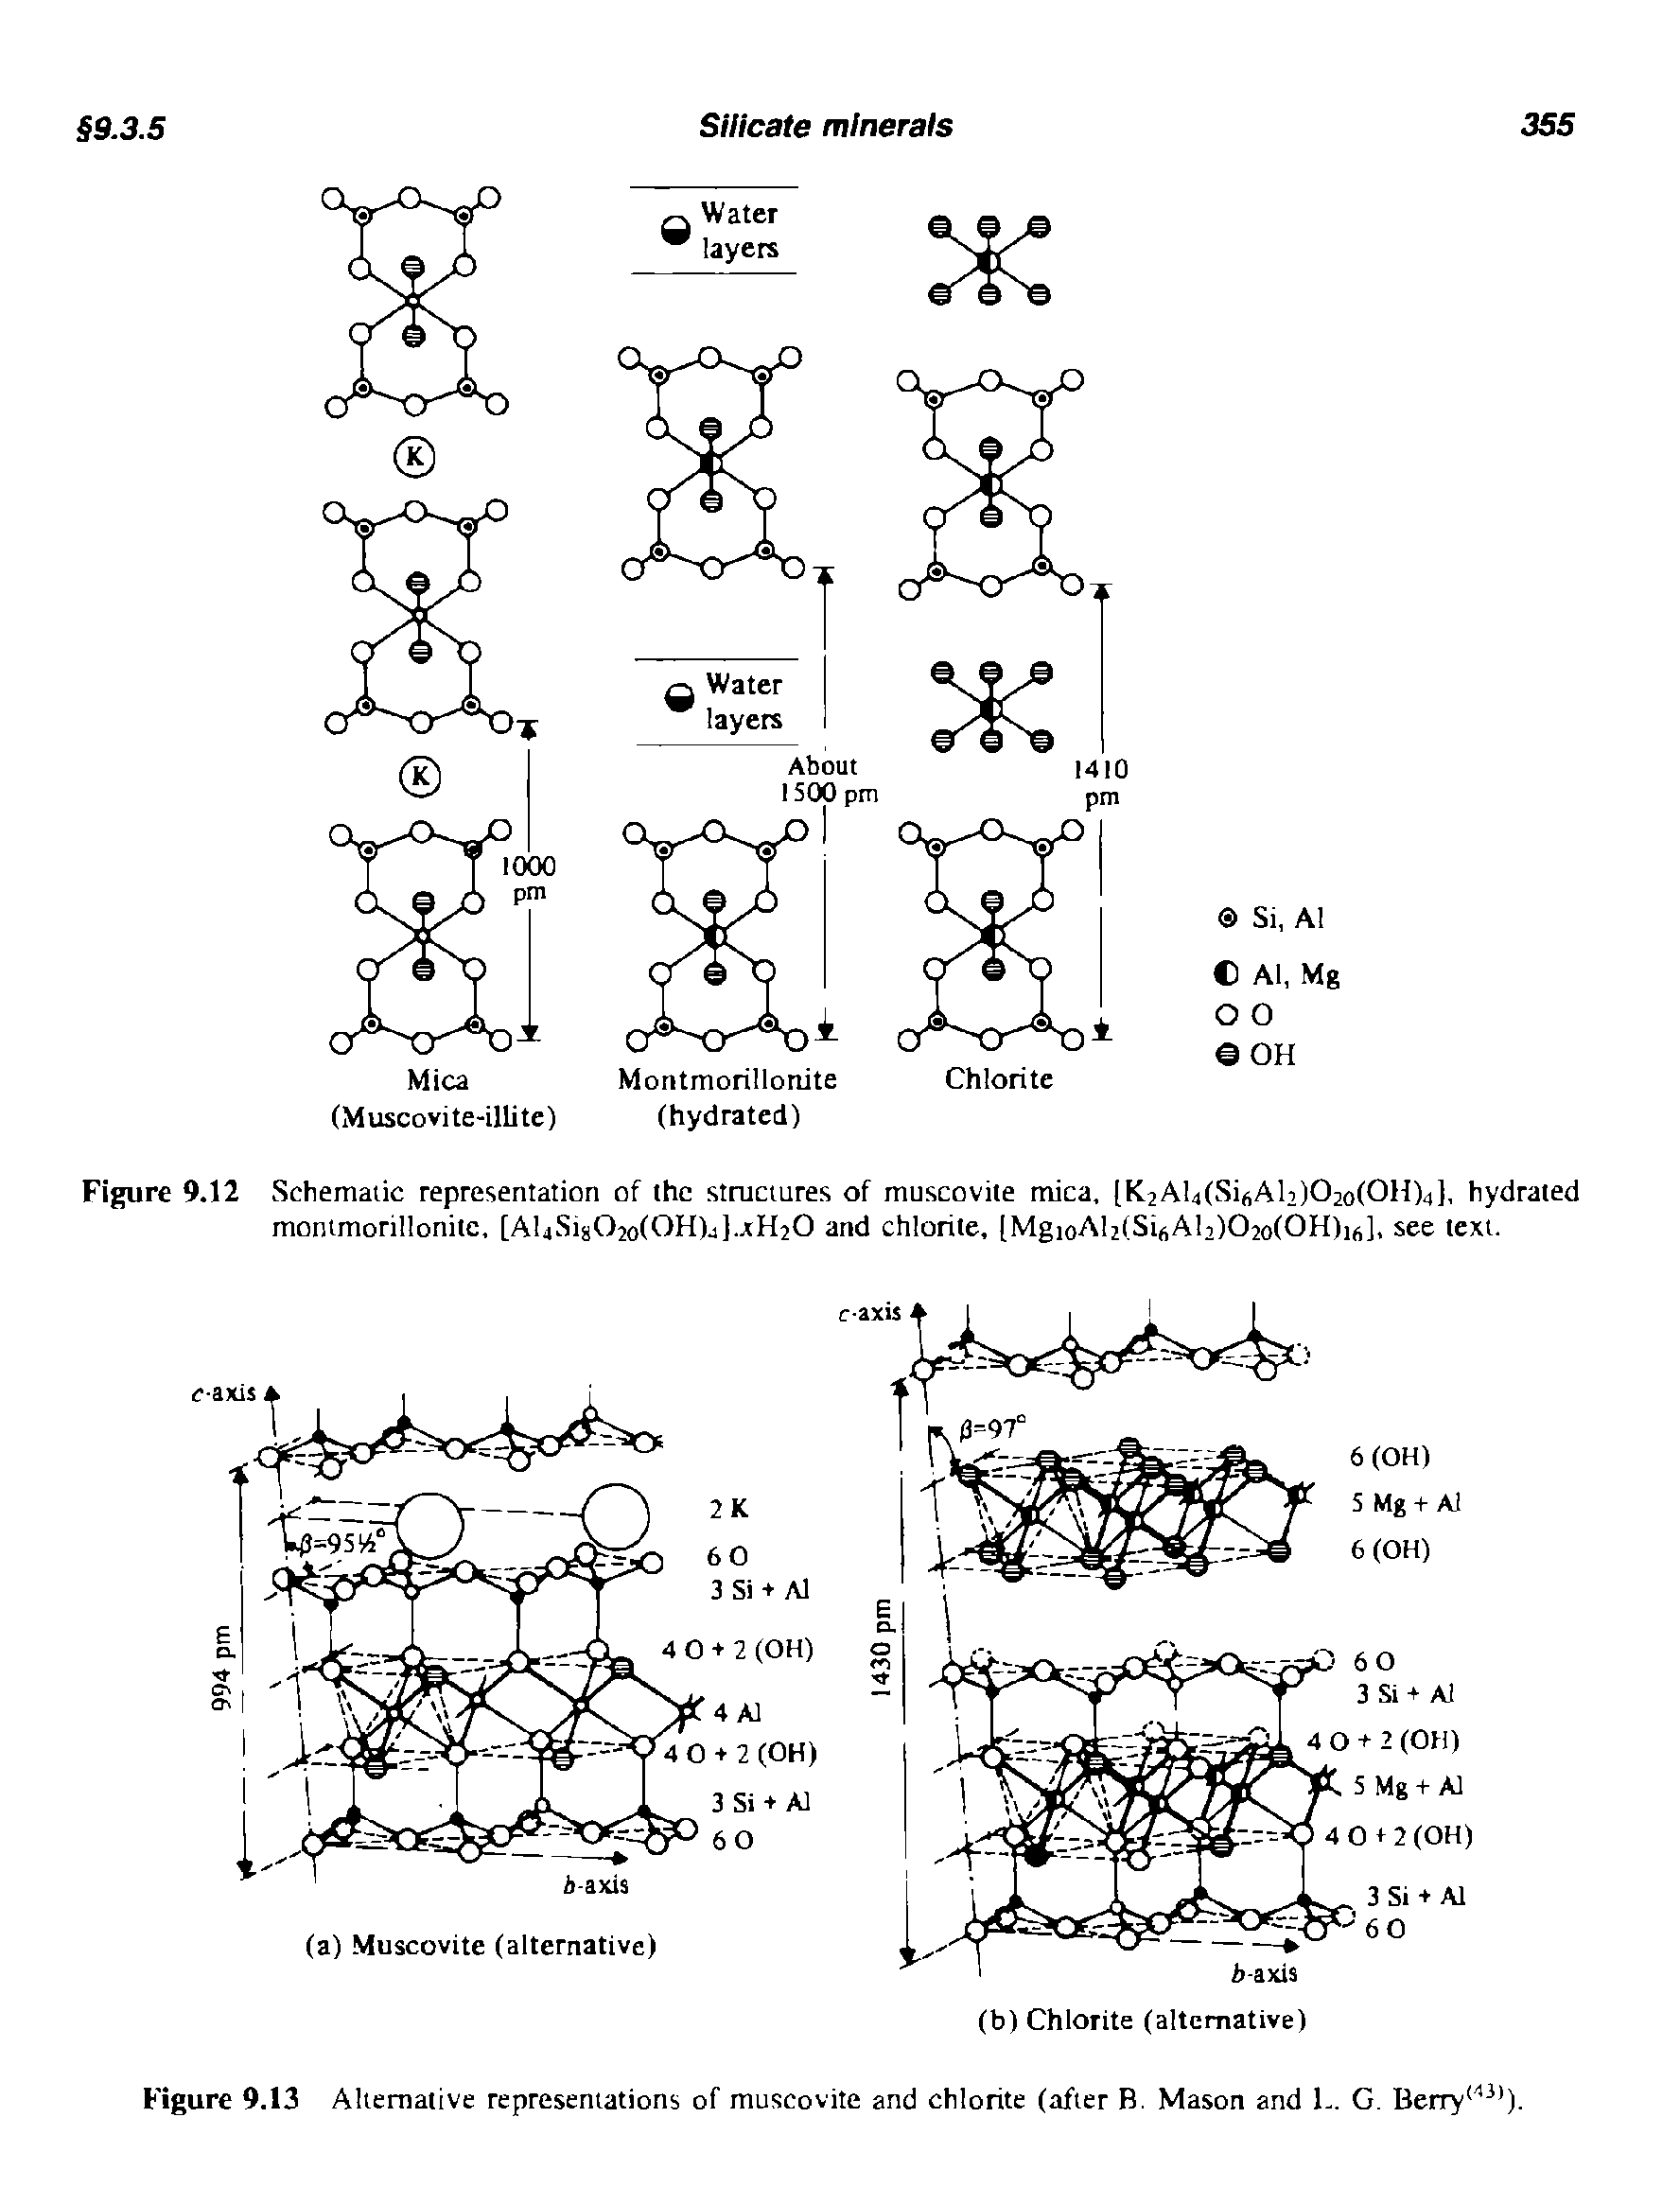 Figure 9.12 Schematic representation of the structures of muscovite mica, (K2Al4(Si6Ali)02o(OH)4], hydrated montmorillonite, [Al4Sig02o(OH)4].xH20 and chlorite, (MgioAl2(Si6Al2)02o(6H)i6], see text.